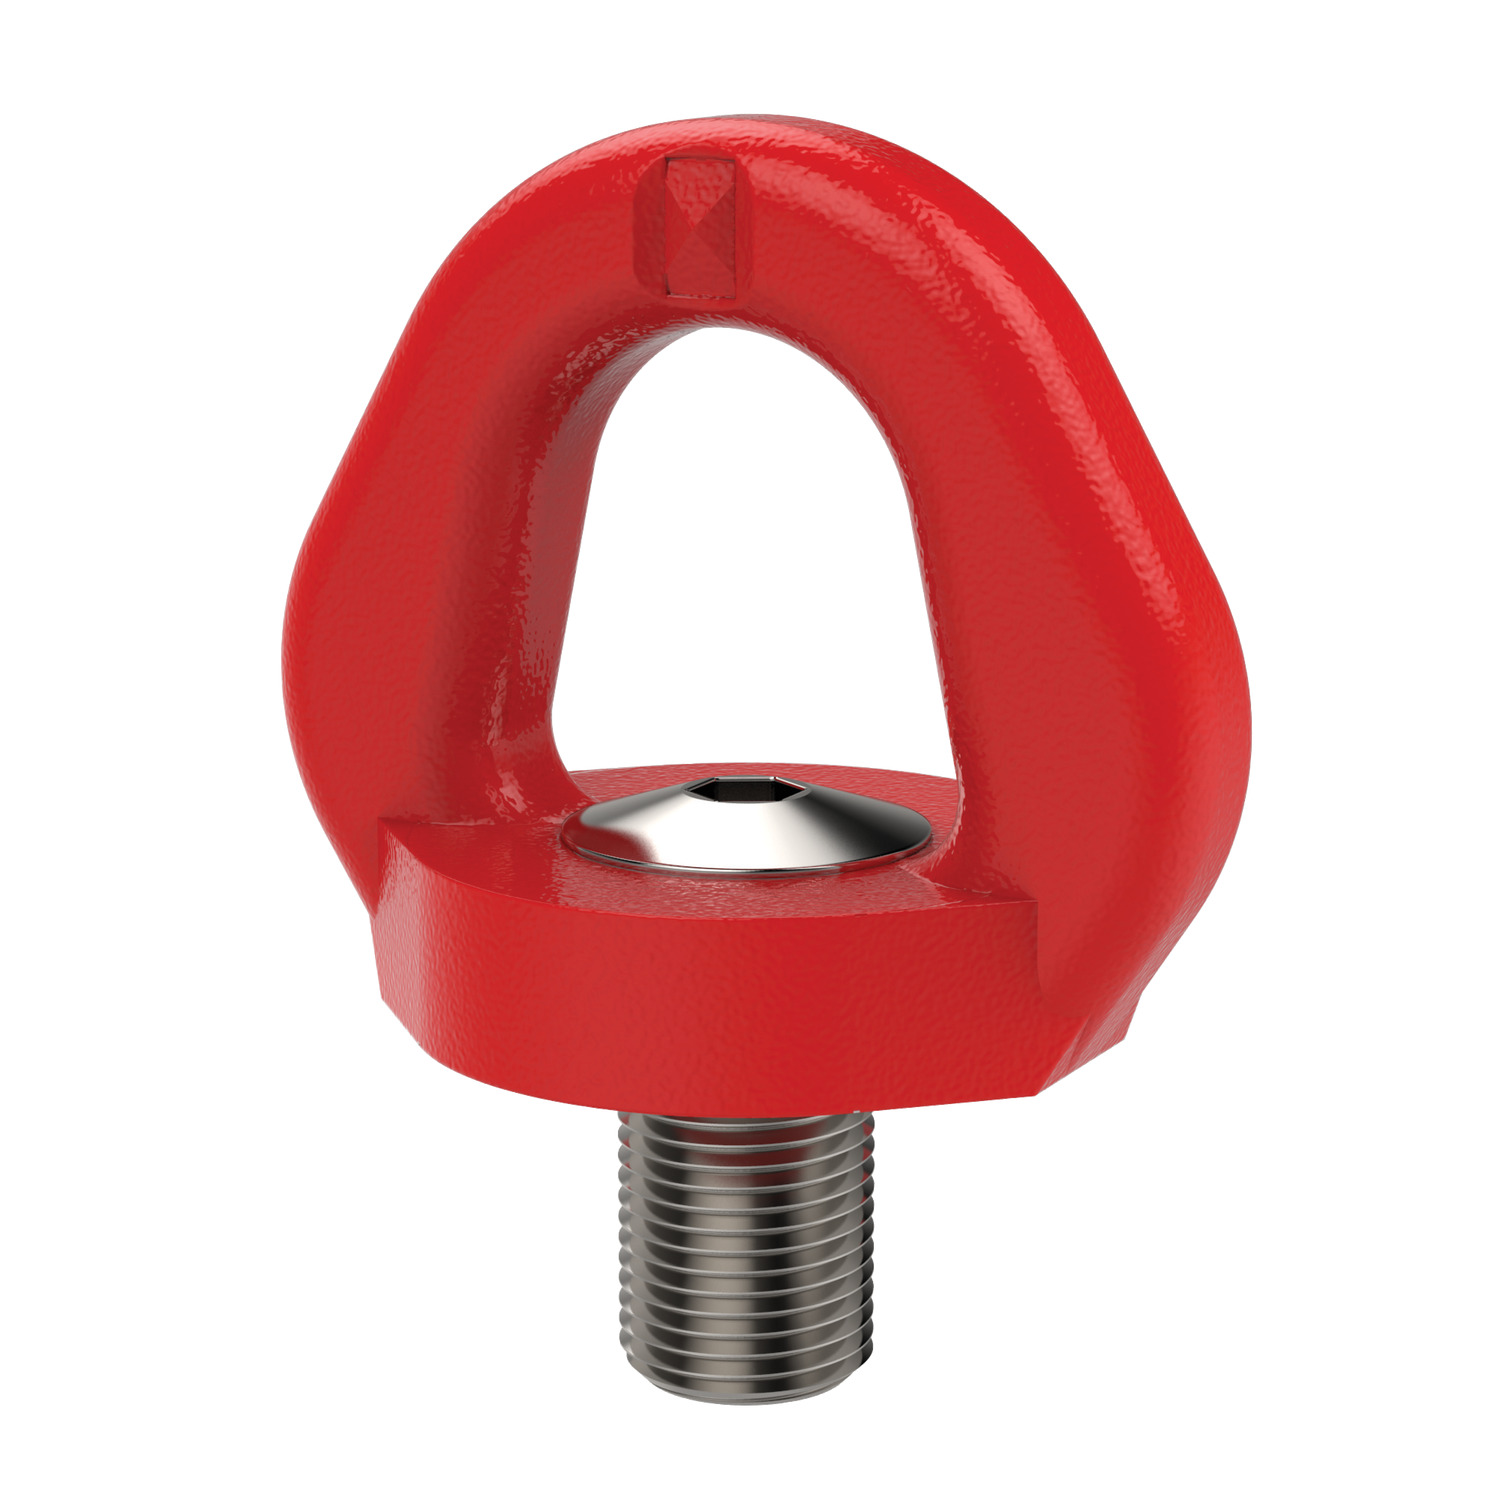 Single Swivel Lifting Available with male and female threads. The single swivel bolts rotate in a single plane to accommodate movements in the lift.